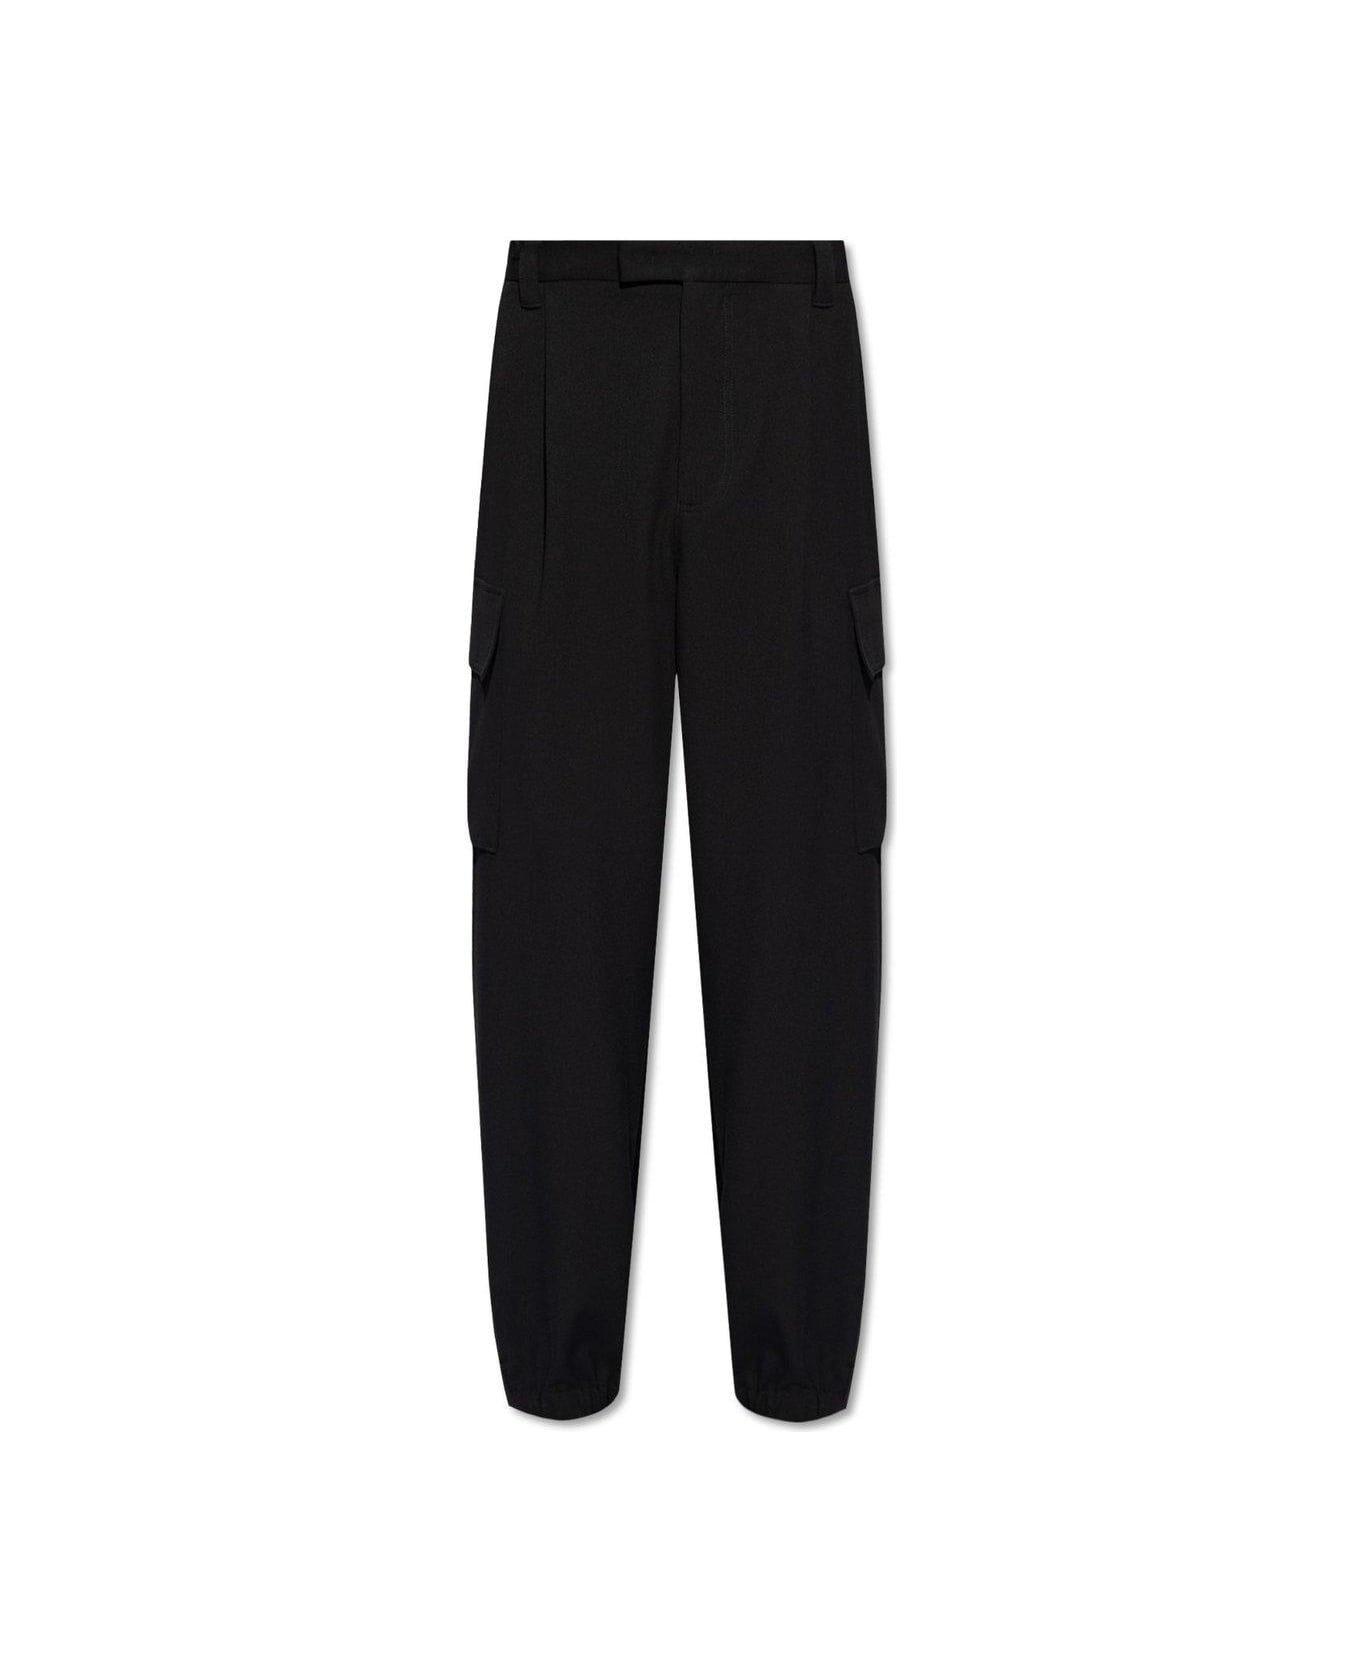 Emporio Armani Trousers With Pockets - Black ボトムス